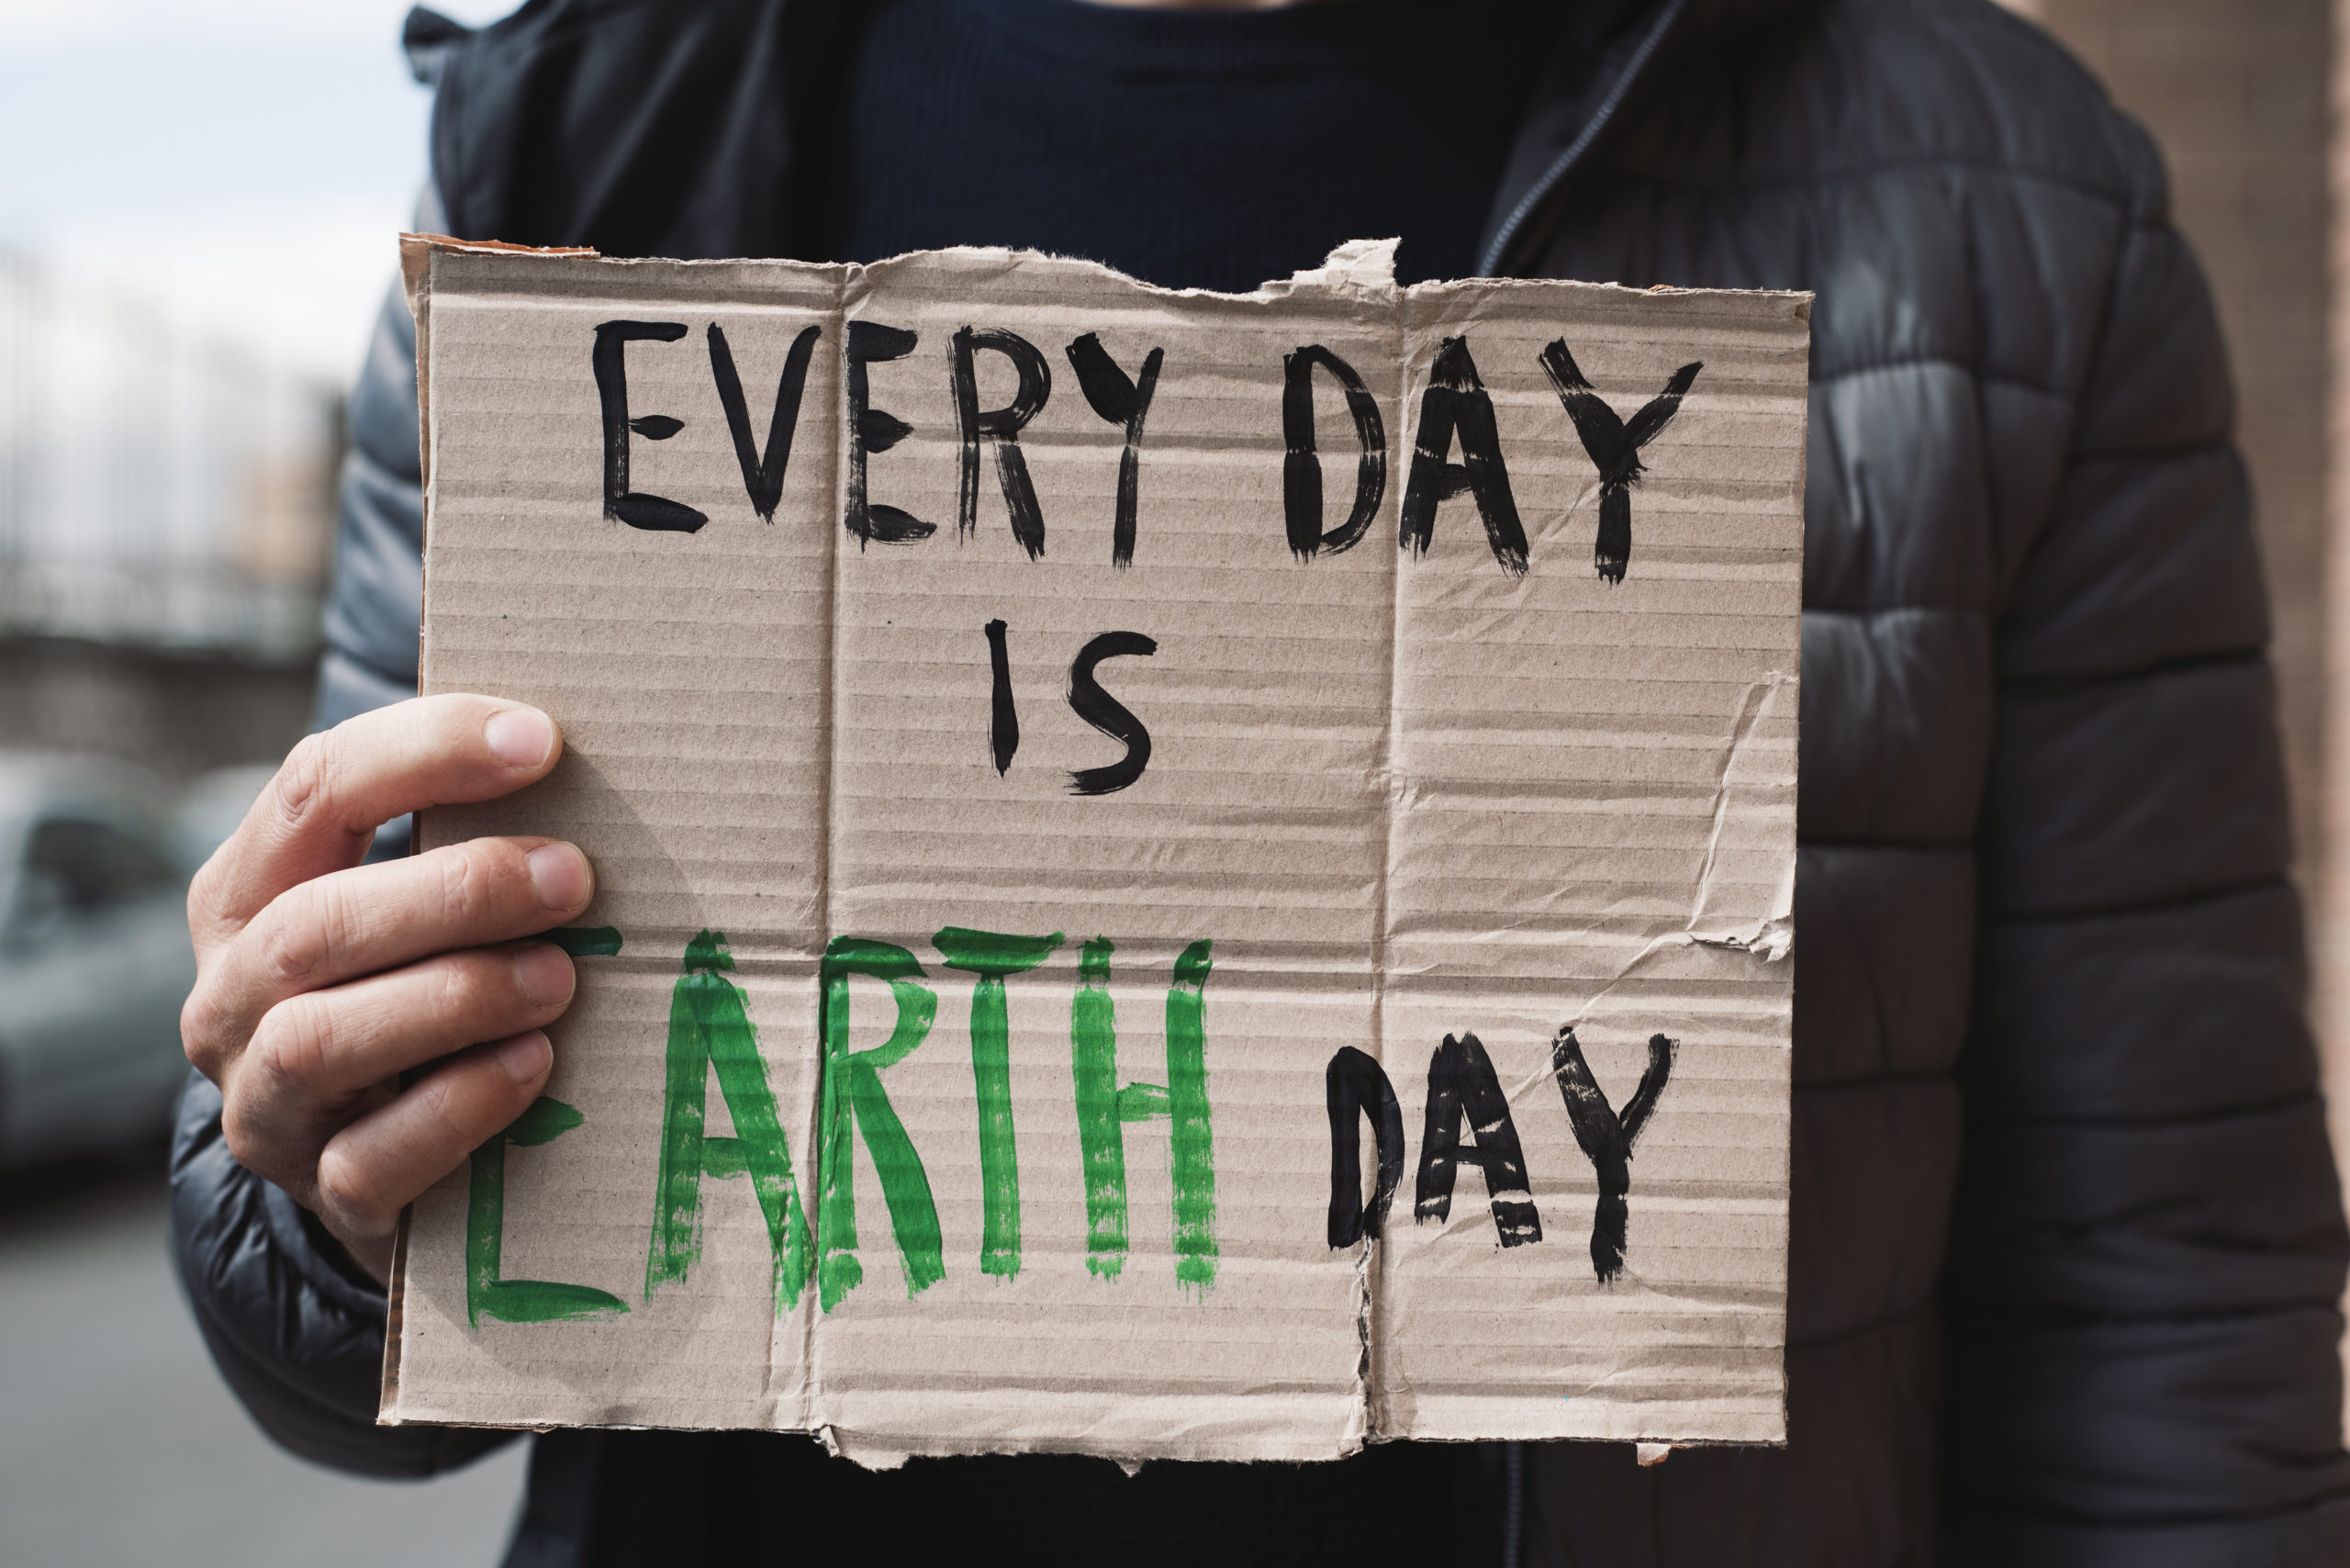 Every day is my earth day cardboard sign